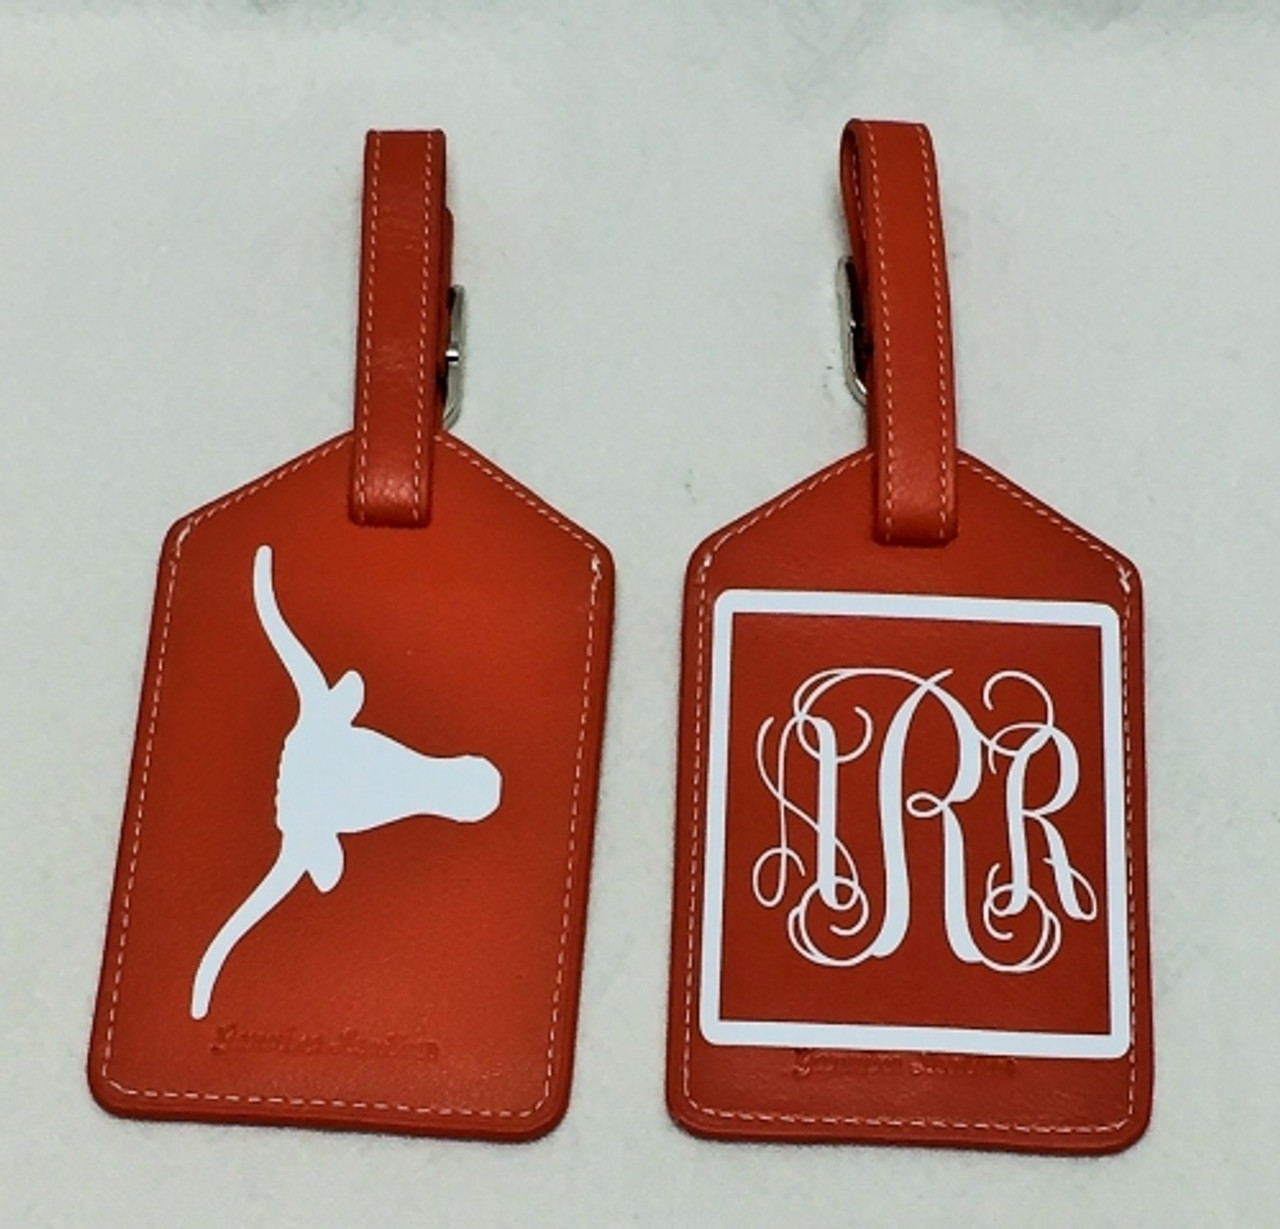 Custom Logo Debossed on LEATHER LUGGAGE TAG - Large Event Group Gift 25+  -Free Ship-Group